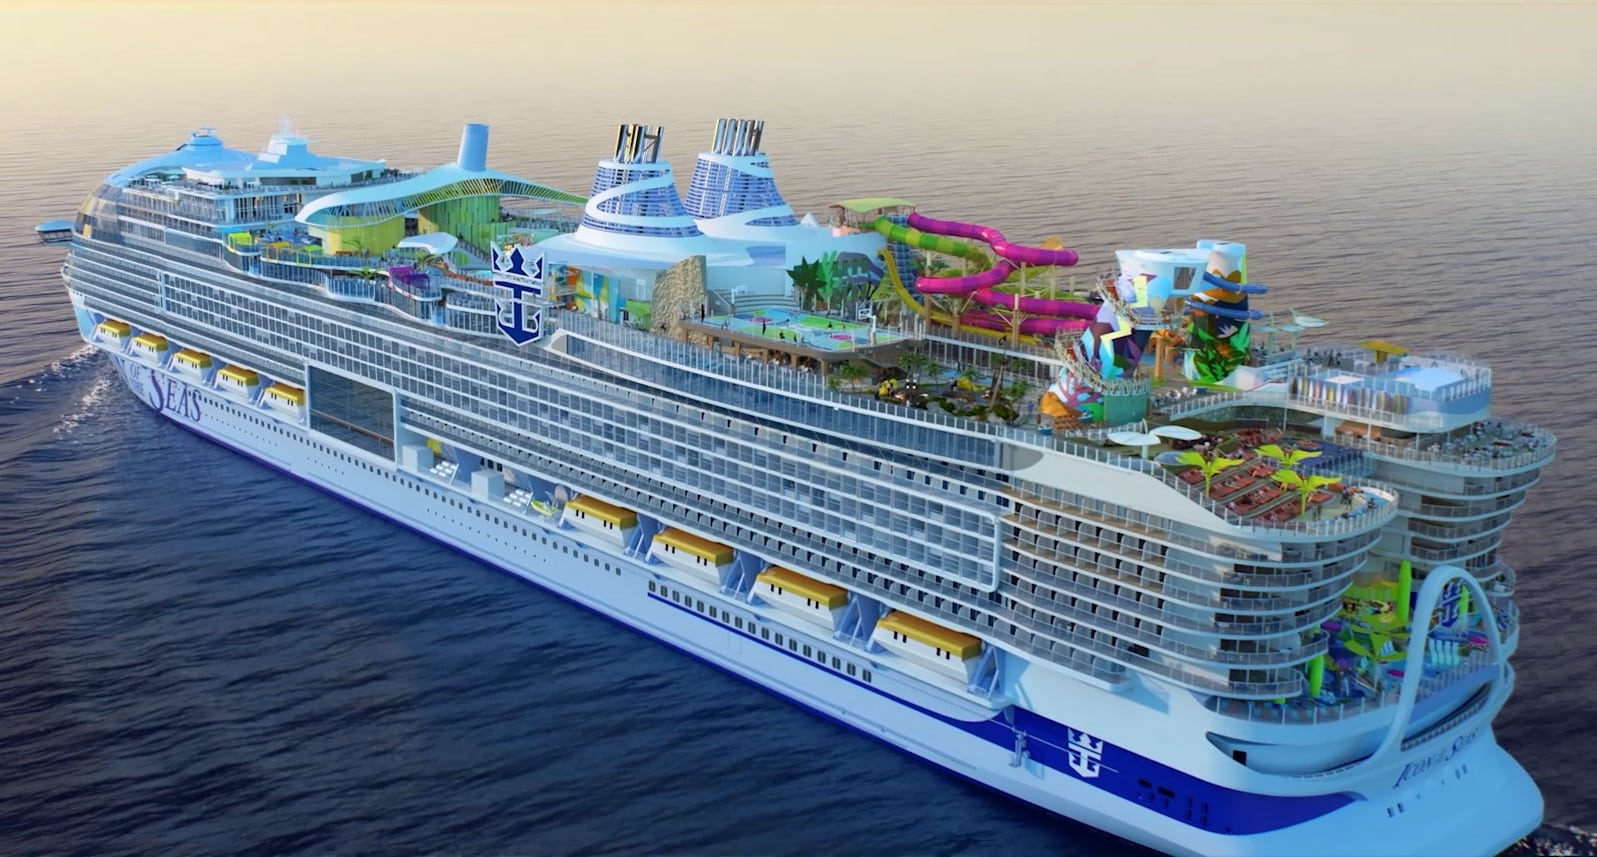 5 Future Cruise Ships You’ll Want to Sail On